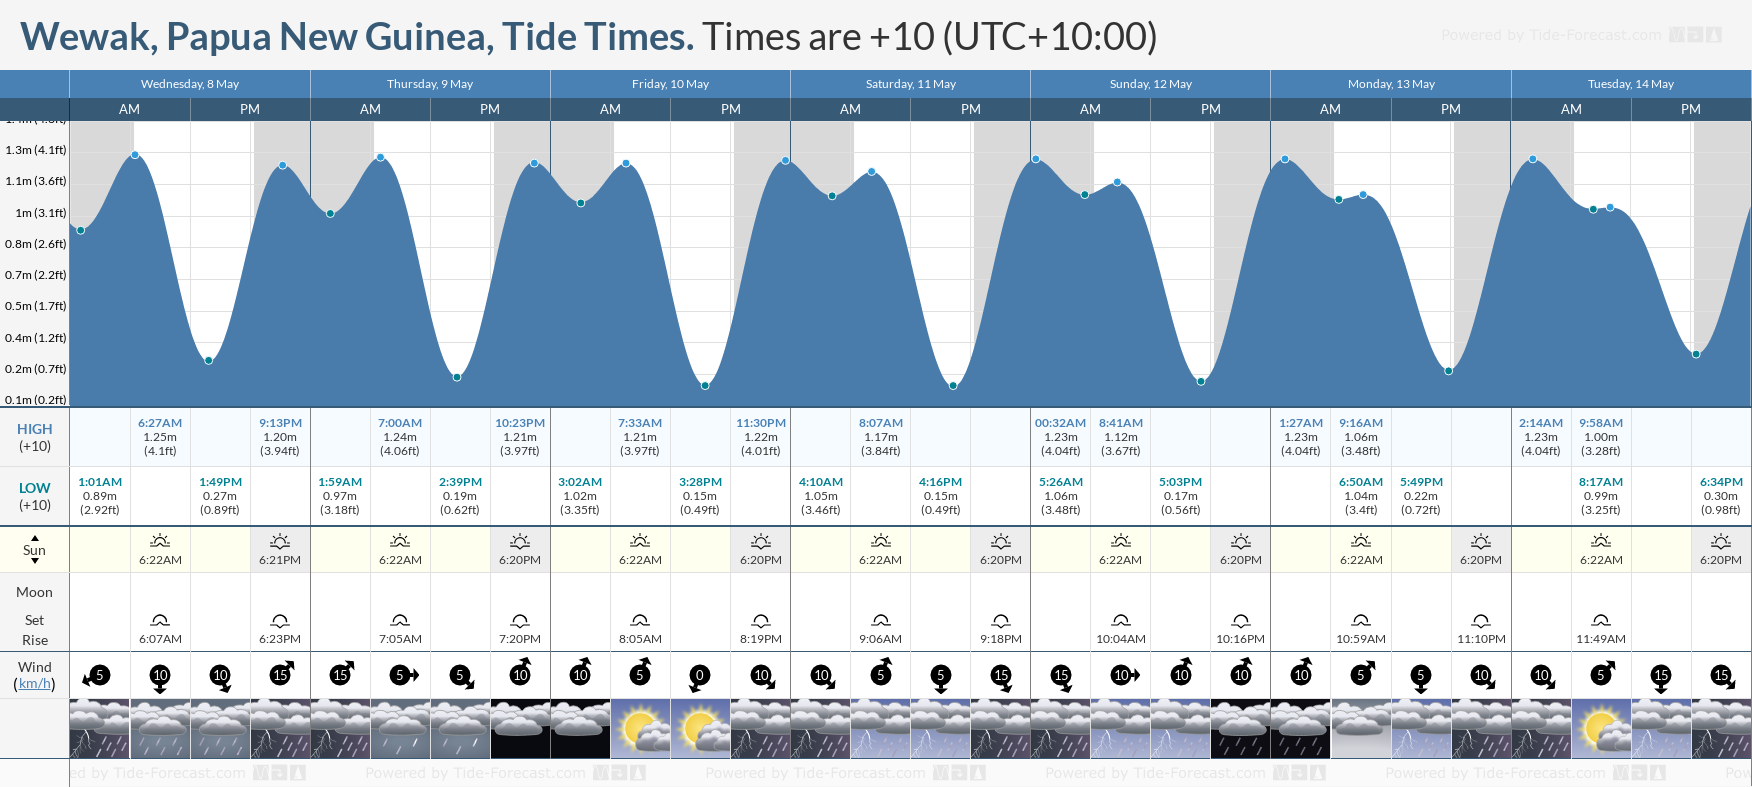 Wewak, Papua New Guinea Tide Chart including high and low tide tide times for the next 7 days